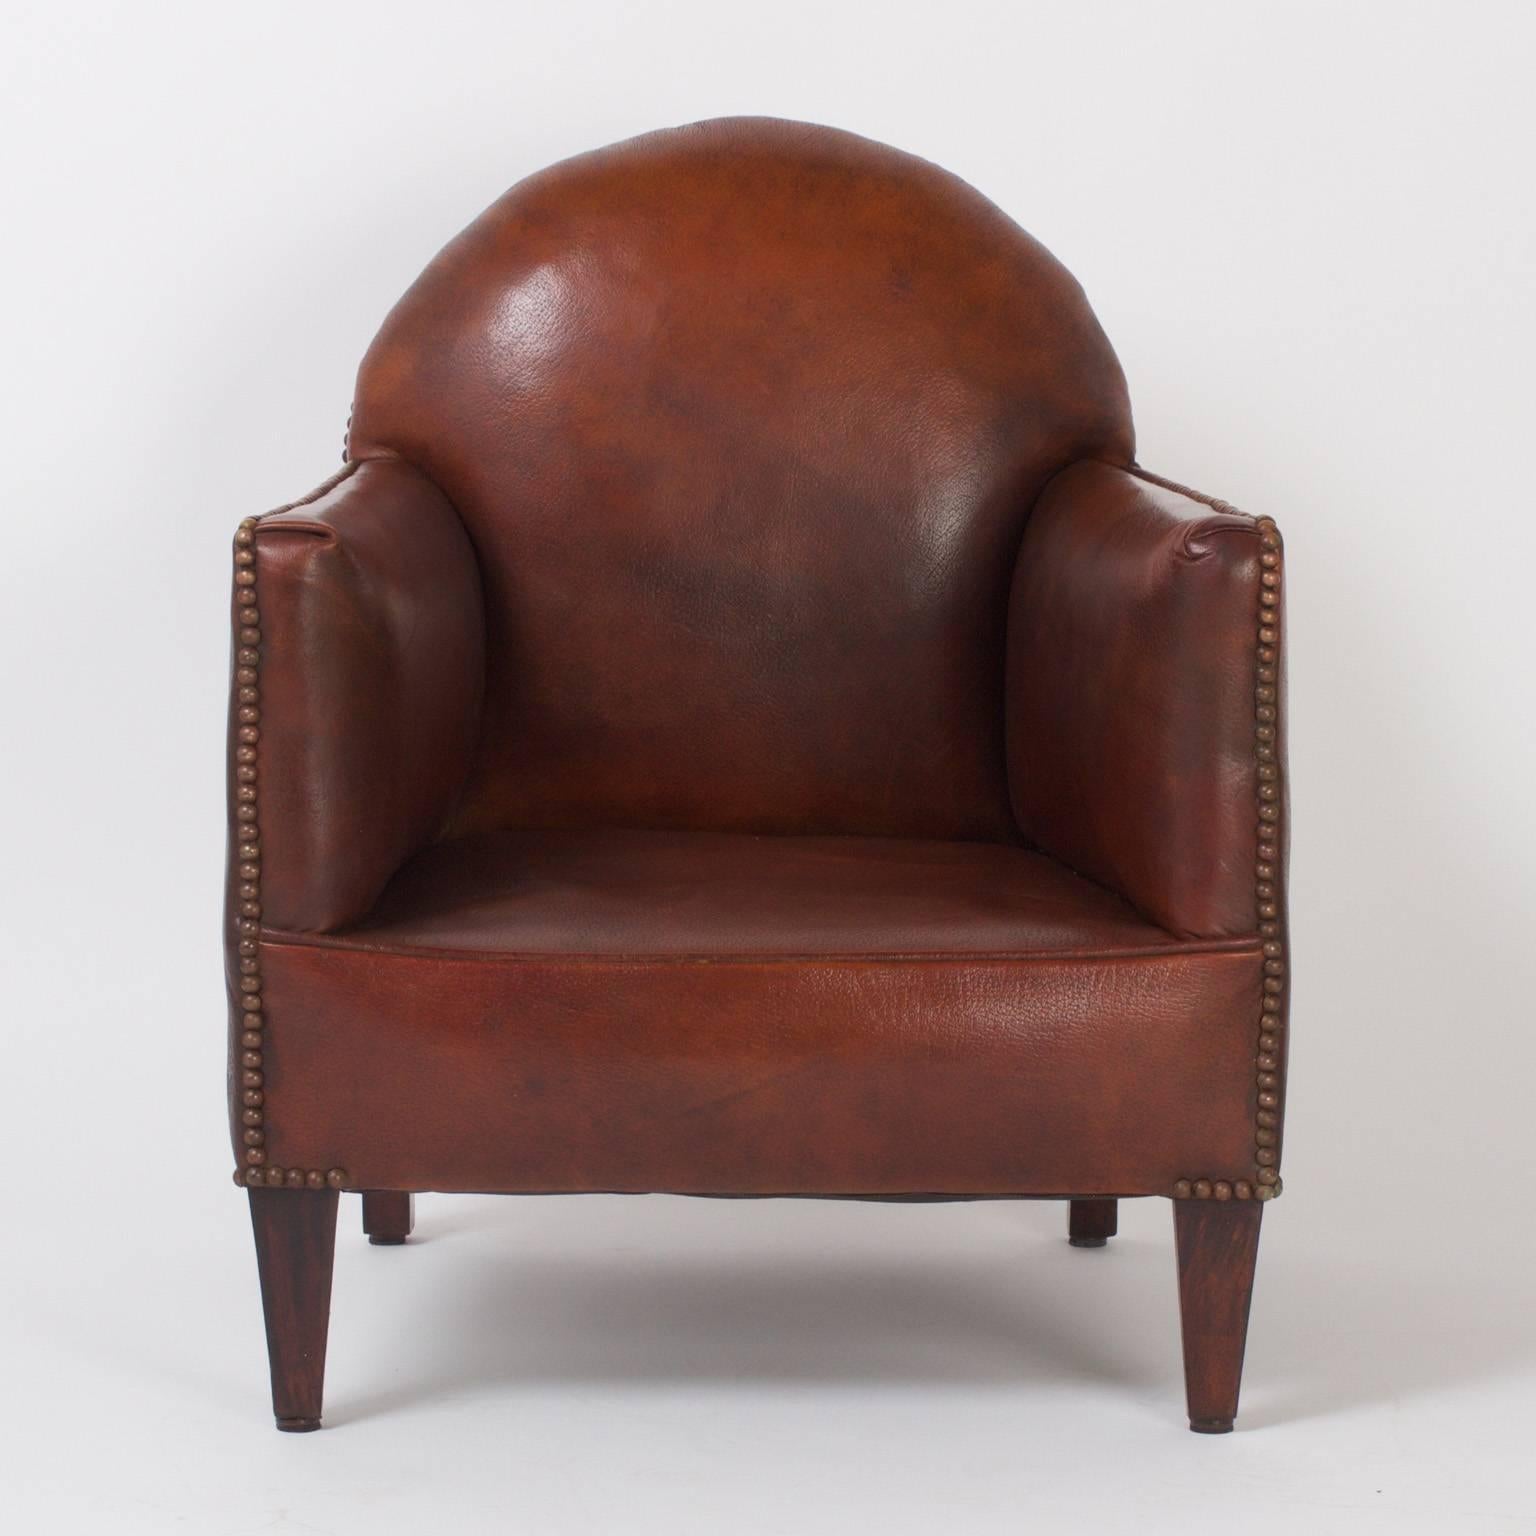 For children with sophisticated taste: A rare pair of French Art Deco child’s armchairs or club chairs upholstered in the original soft brown leather. The diminutive, yet Classic form is highlighted by brass studs. The front legs are tapered and the